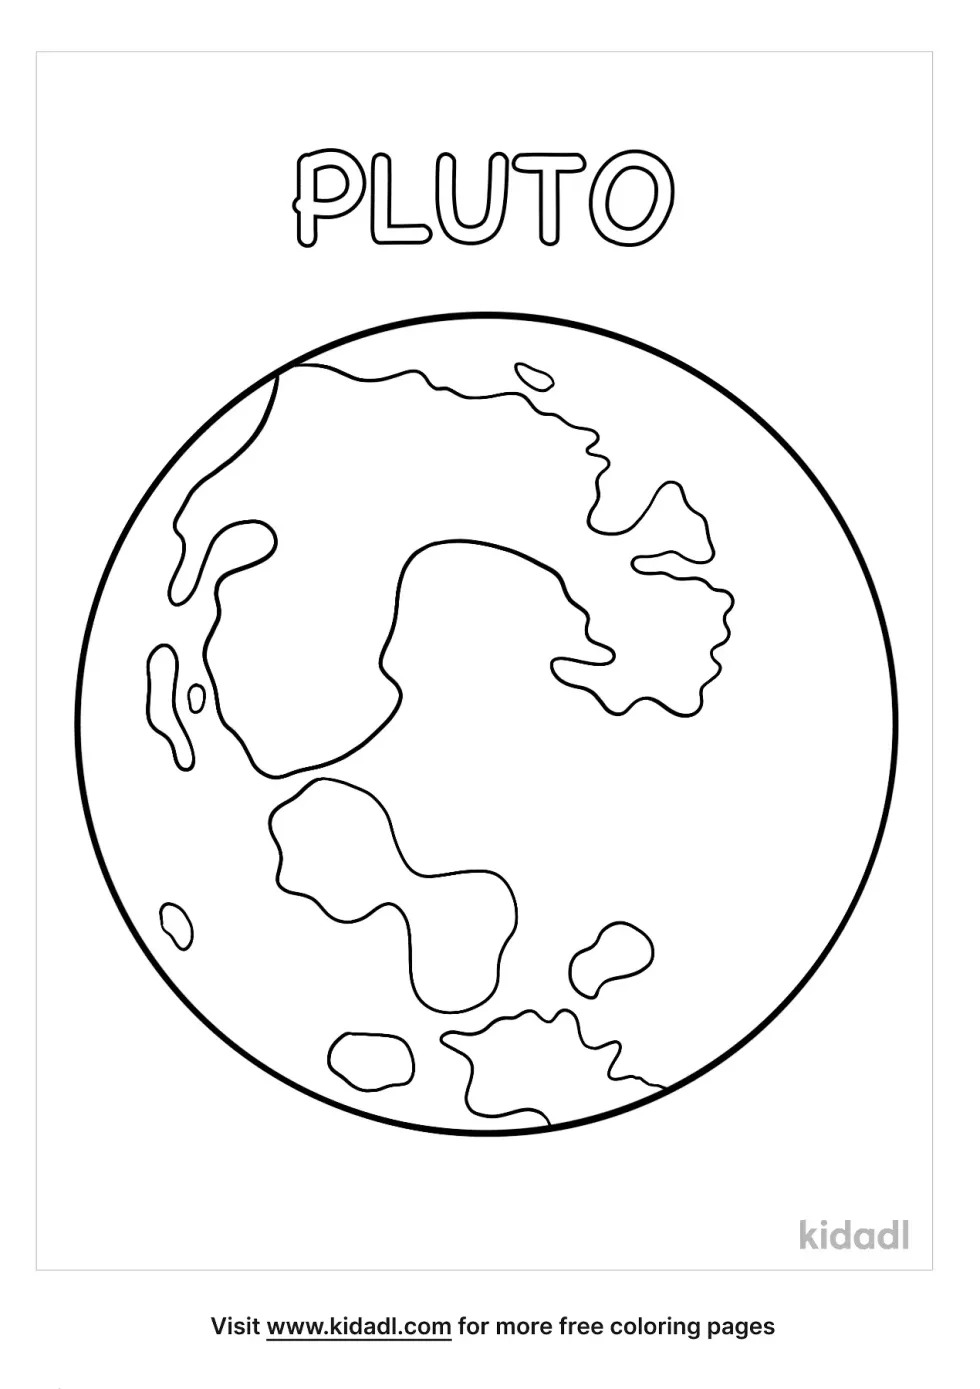 Pluto Planet Coloring Page